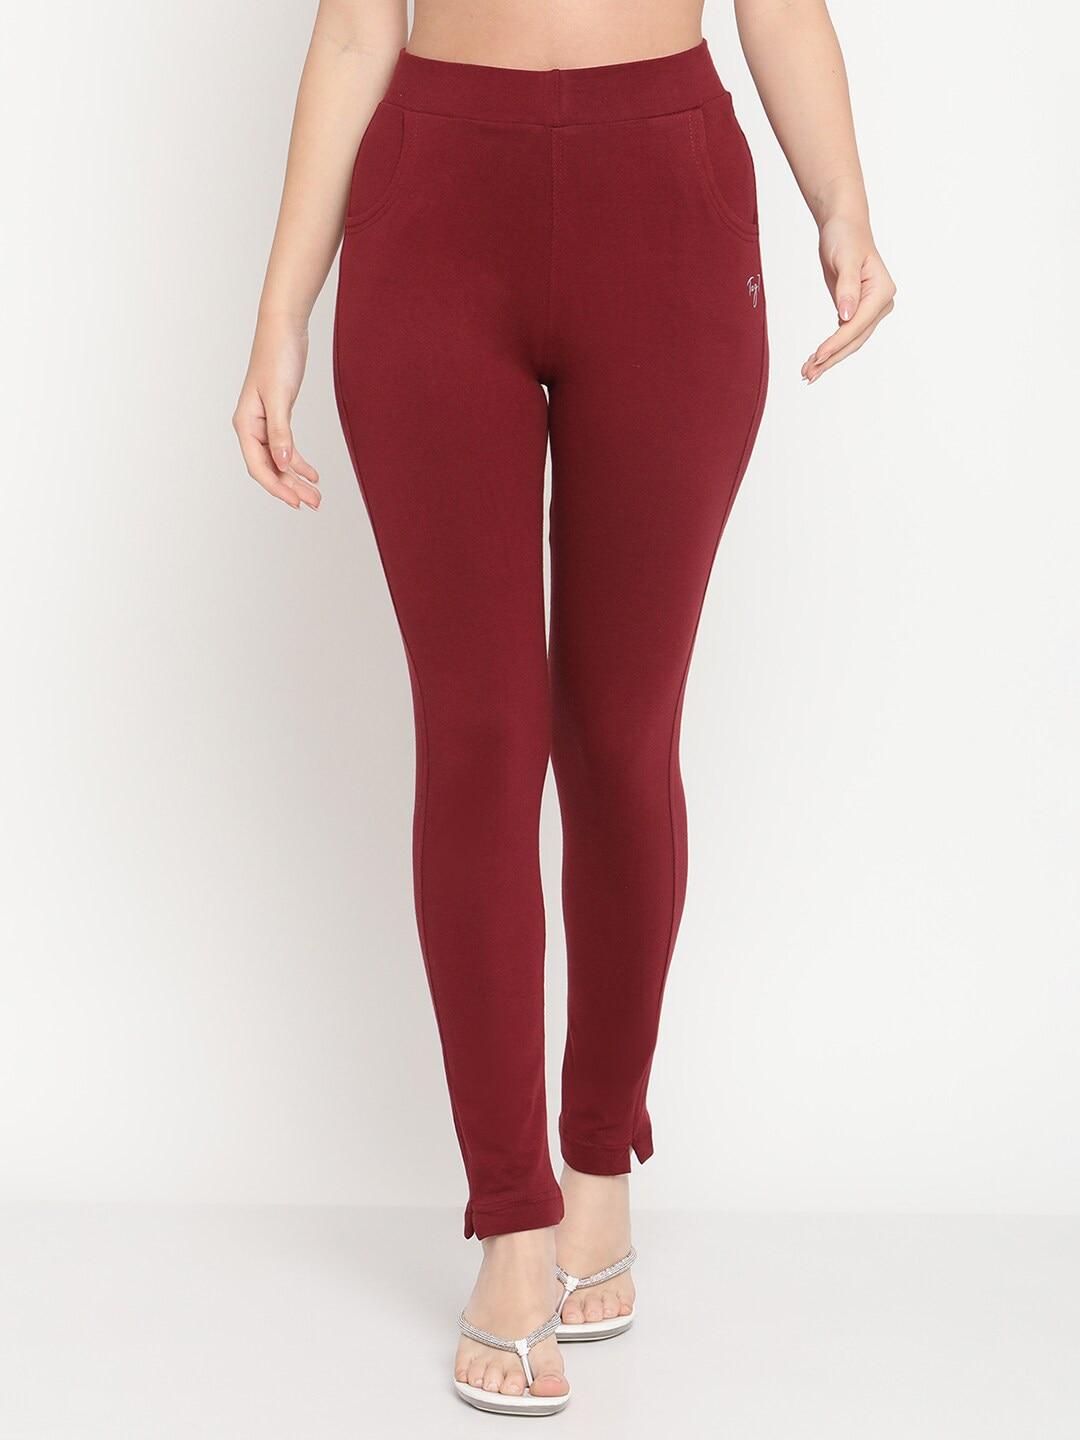 tag-7-women-maroon-solid-jeggings